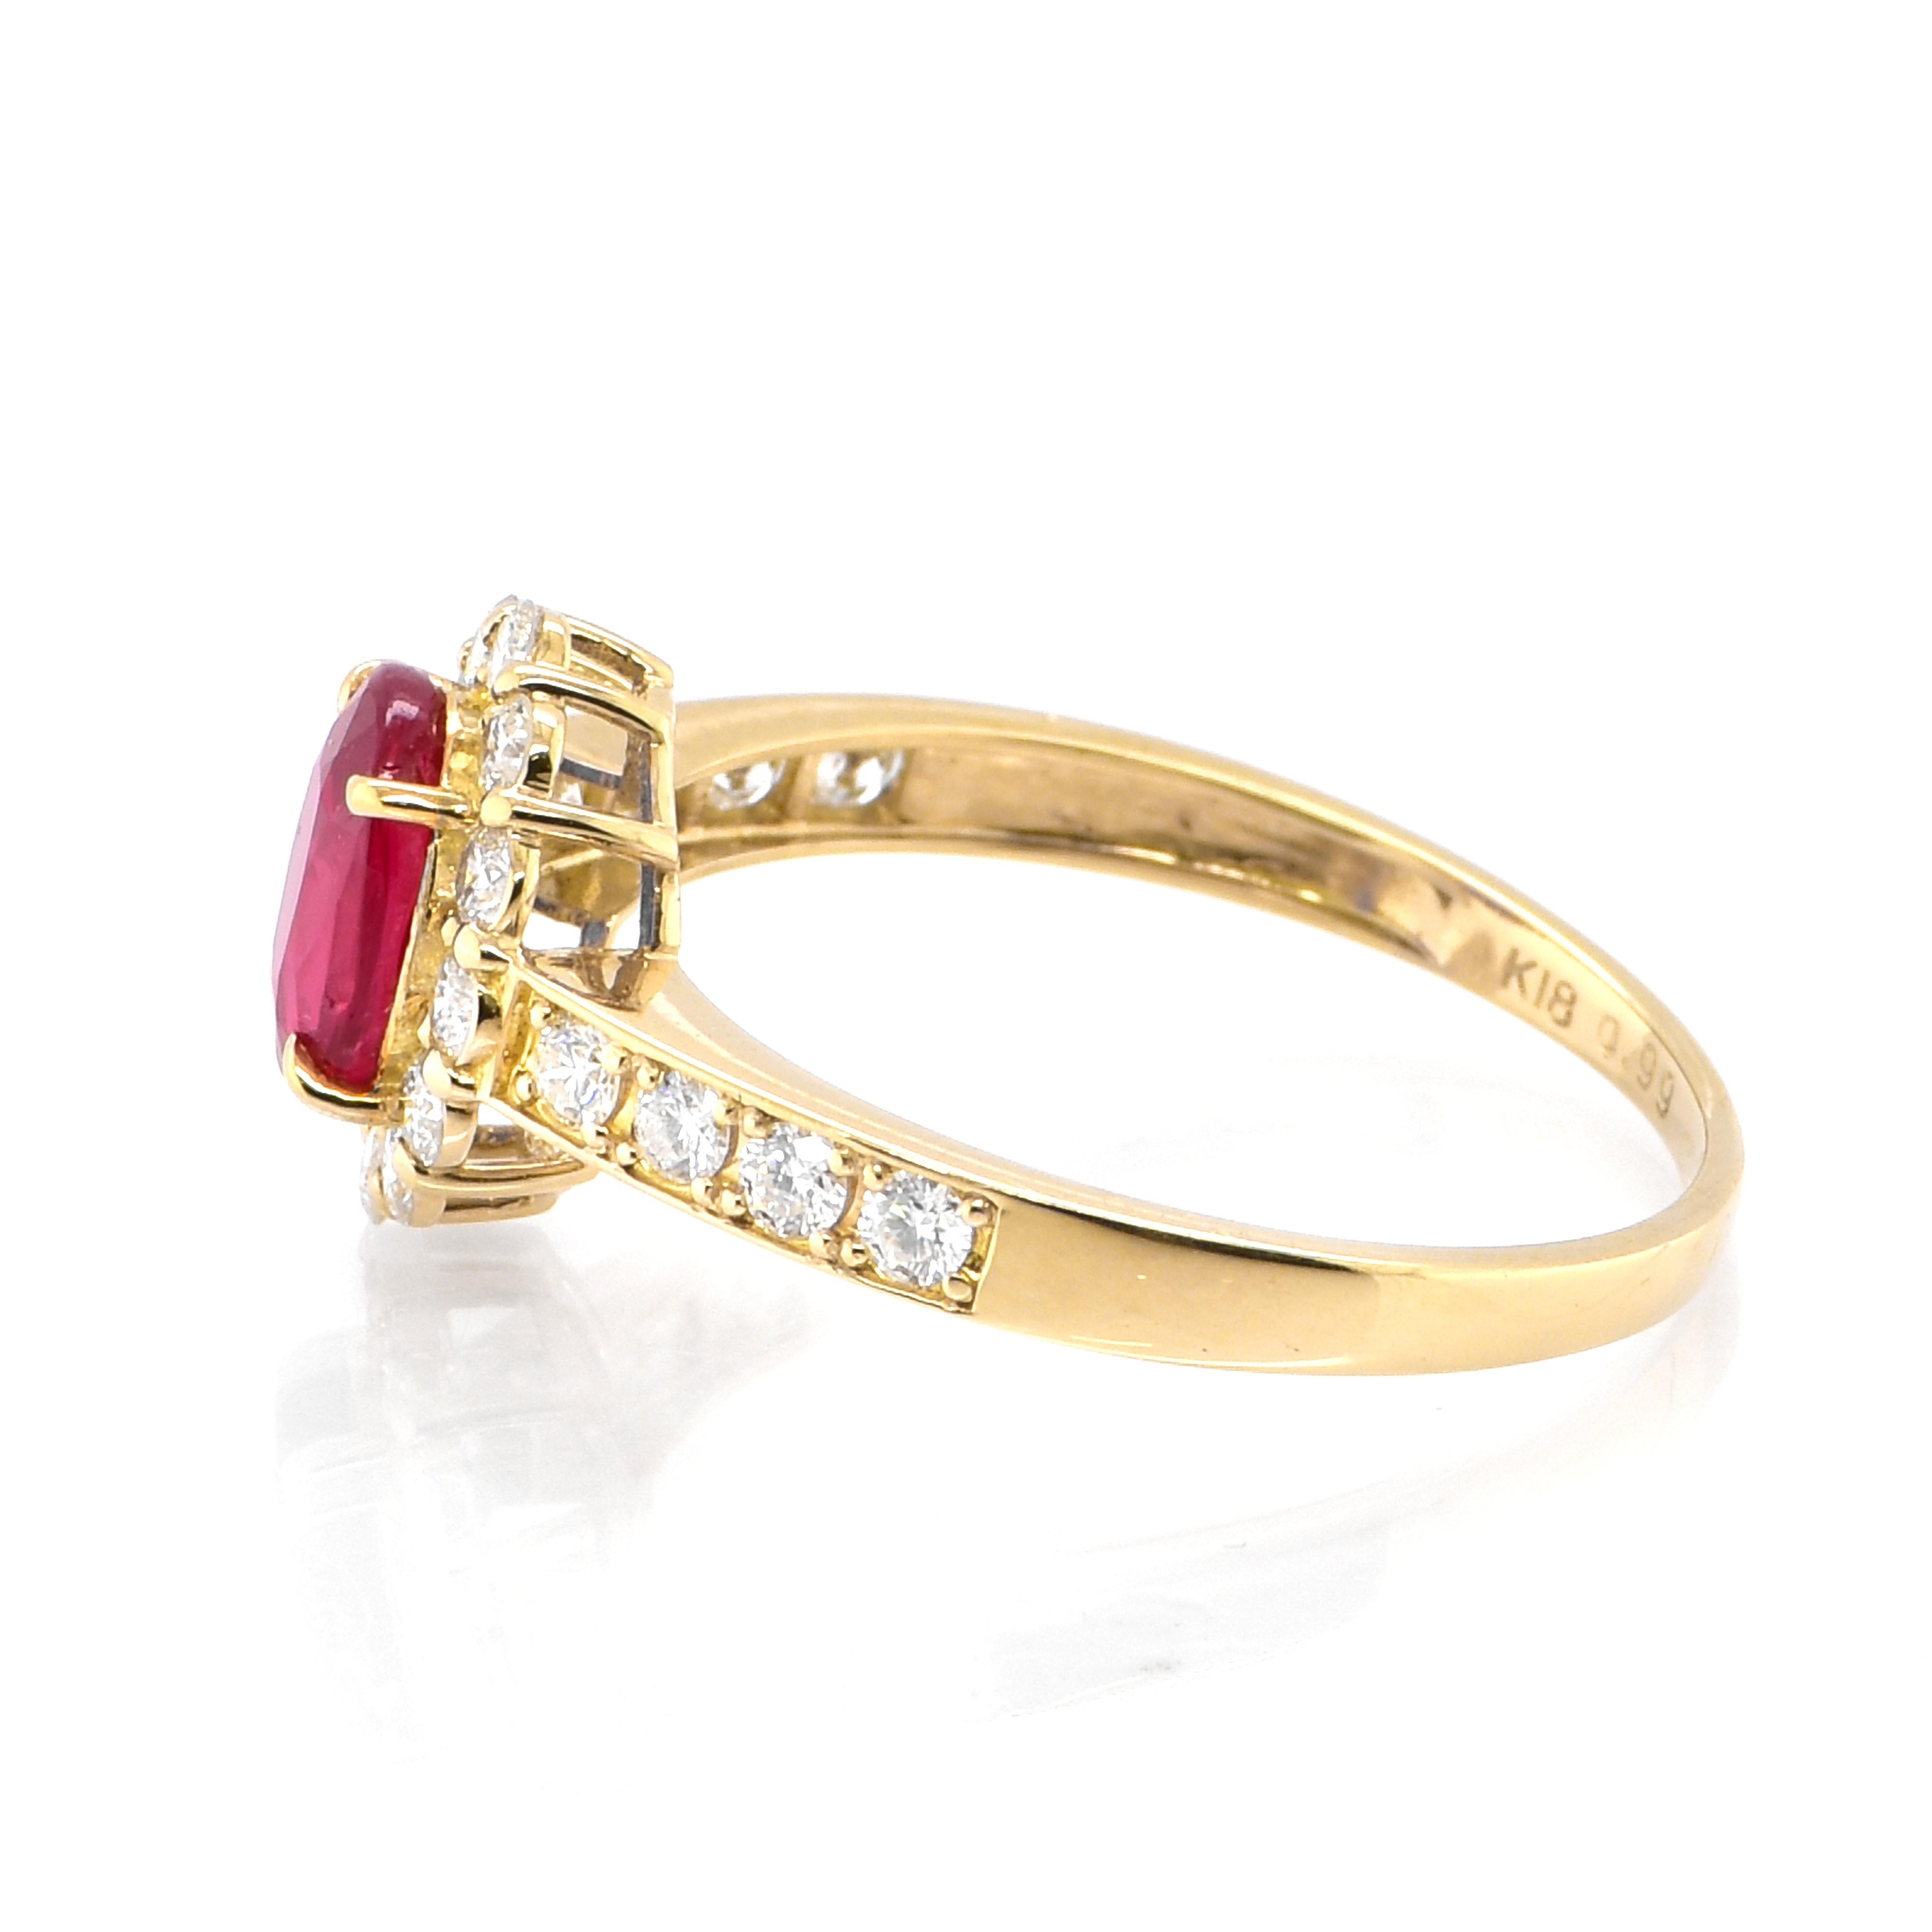 Modern 0.99 Carat, Pigeon Blood Red, Untreated Ruby and Diamond Ring Made in Platinum For Sale